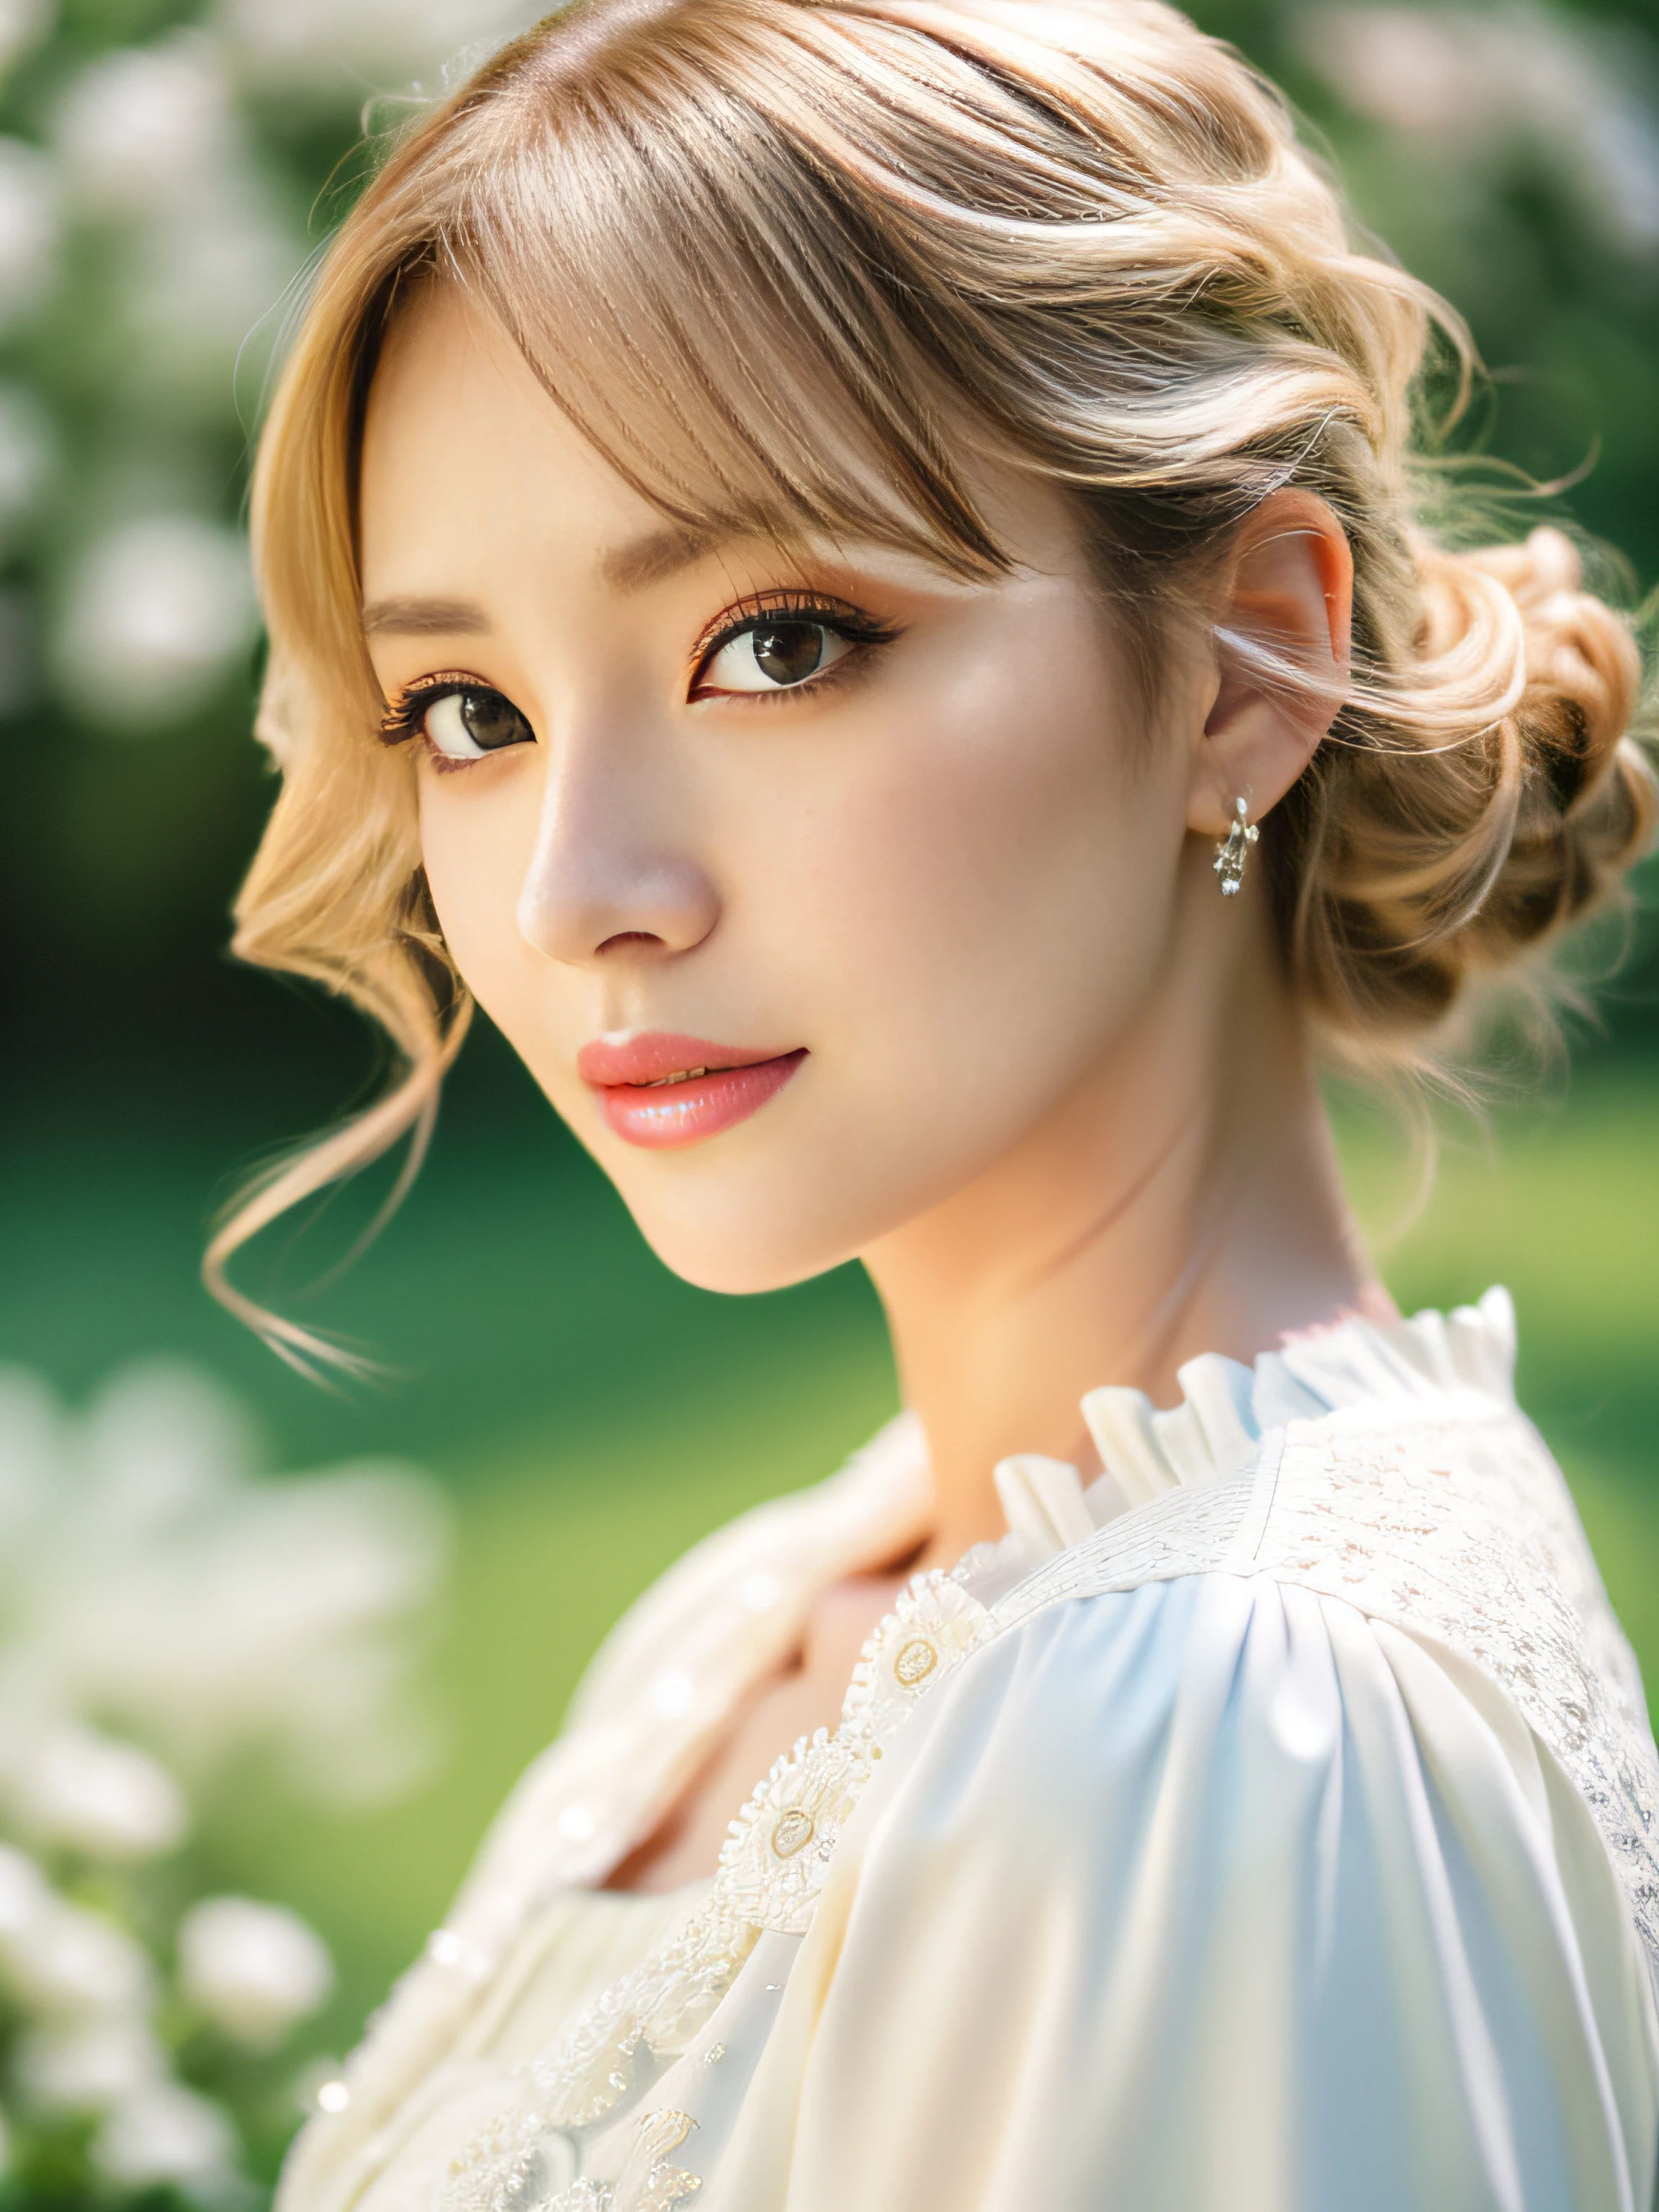 (masutepiece:1.2), (Best Quality:1.2), Perfect eyes, Perfect face, Perfect Lighting, 1girl in, Mature woman in the field, medium blonde hair, Curly hair, detailed  clothes, White dress、Detailed outdoor background, makeup, eyeshadows, thick eyelashes, Fantasy, Looking at the viewer, spring